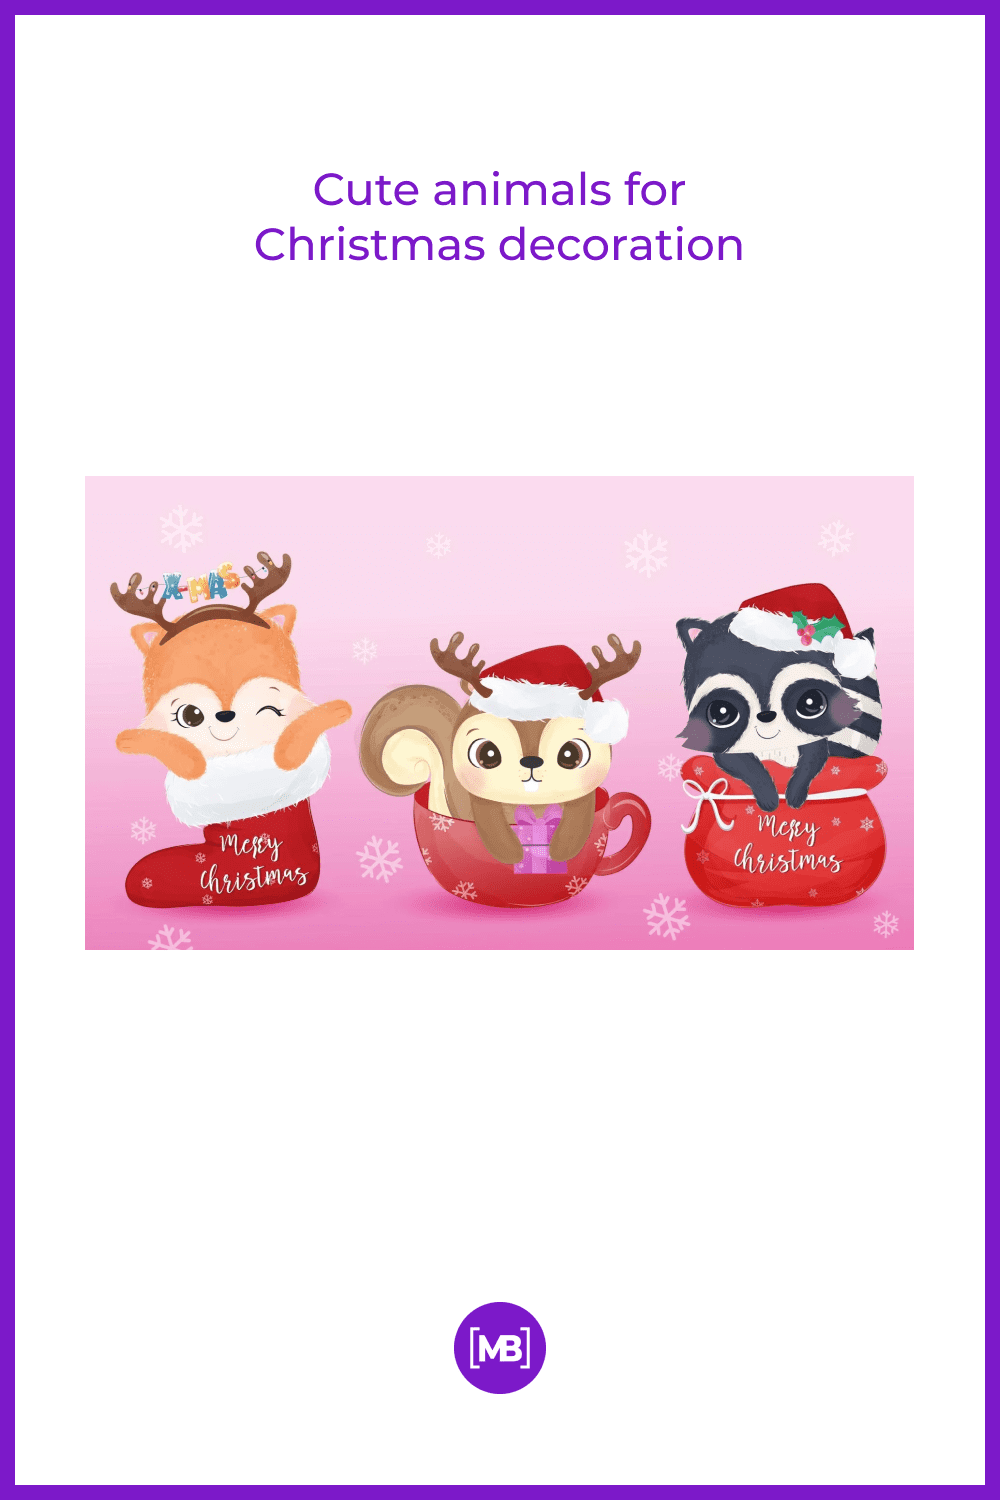 fox, squirrel and raccoon in Christmas outfits look out of red bags on a pink background.